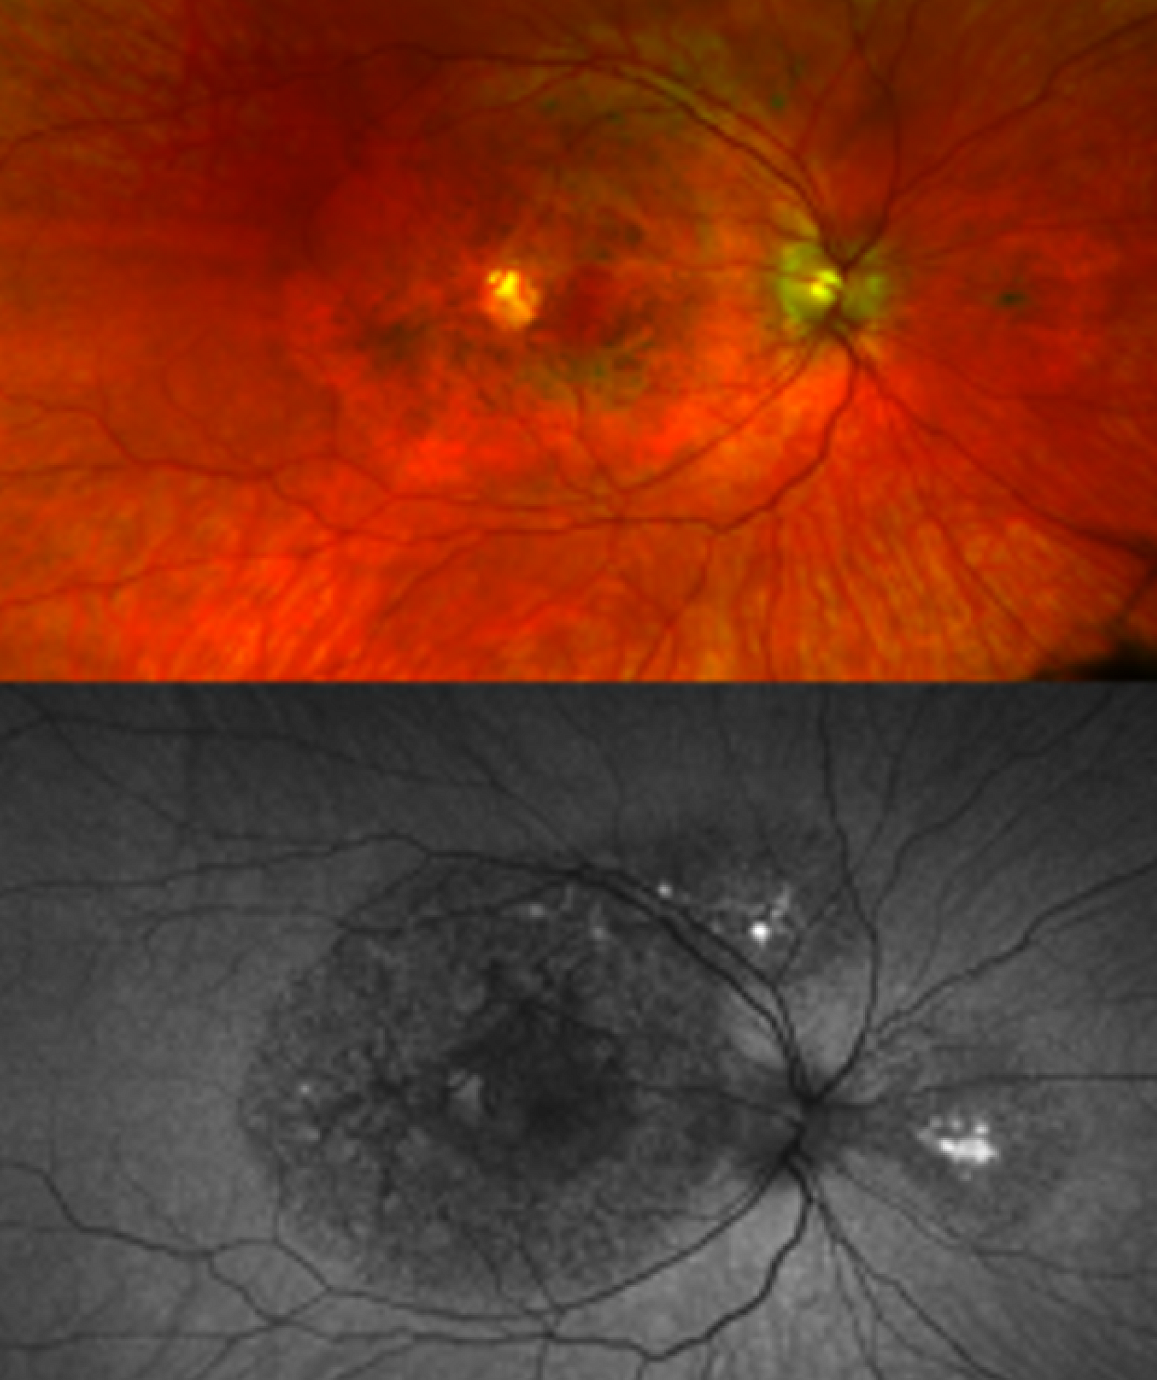 Retinal images of a patient with a TIMP3 mutation causing atypical symptoms. While there is visible damage in the retina (dark circles), there is no CNV present. (Image courtesy of NEI)